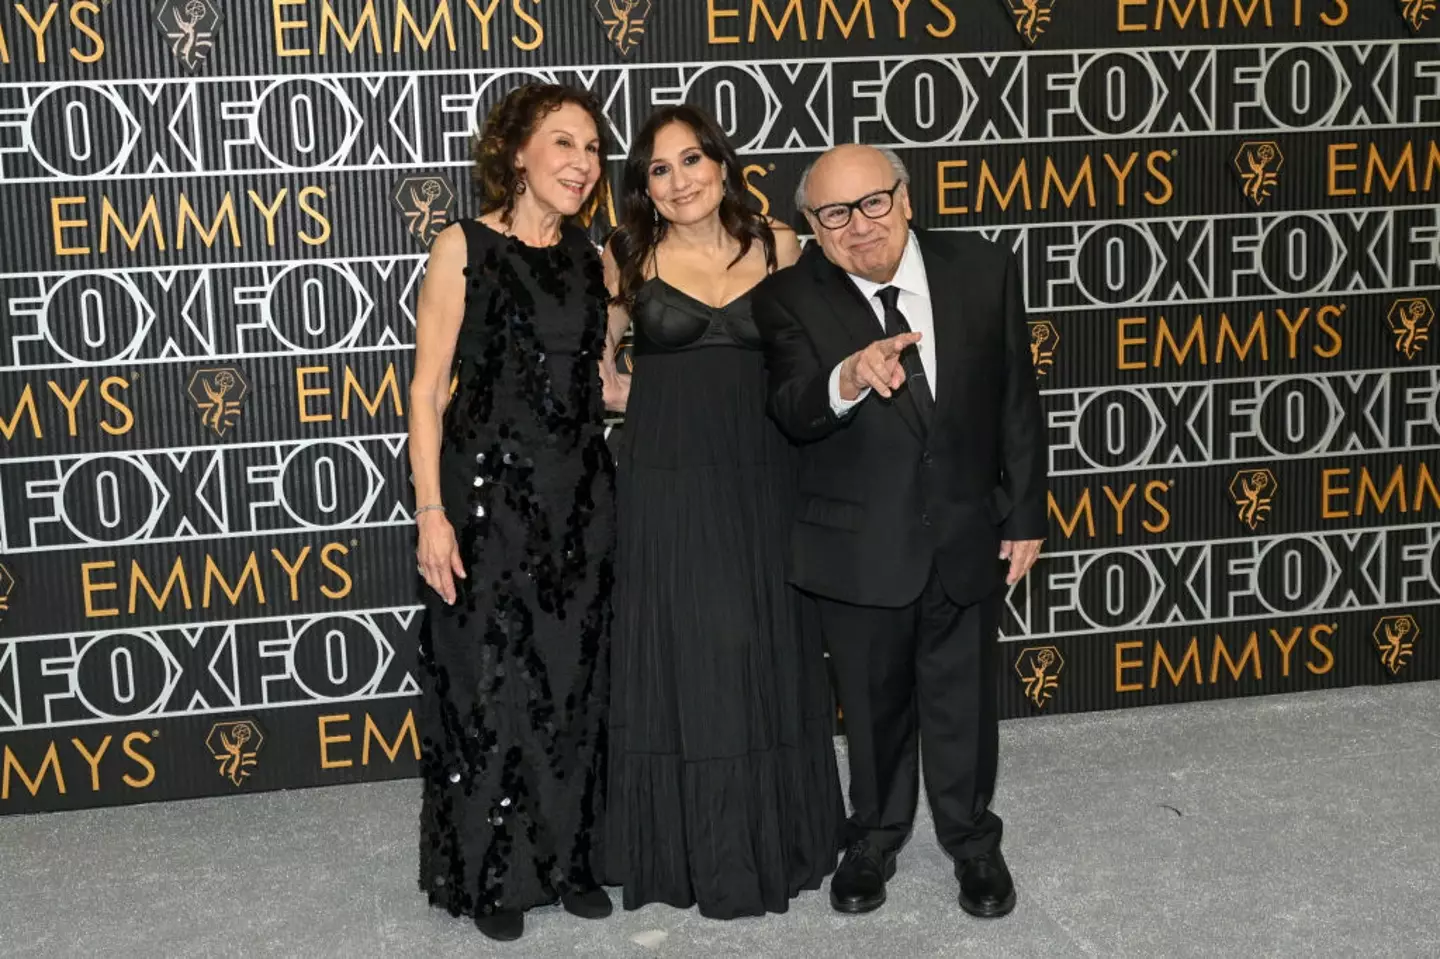 The couple appeared at the Emmys together with their daughter, Lucy.